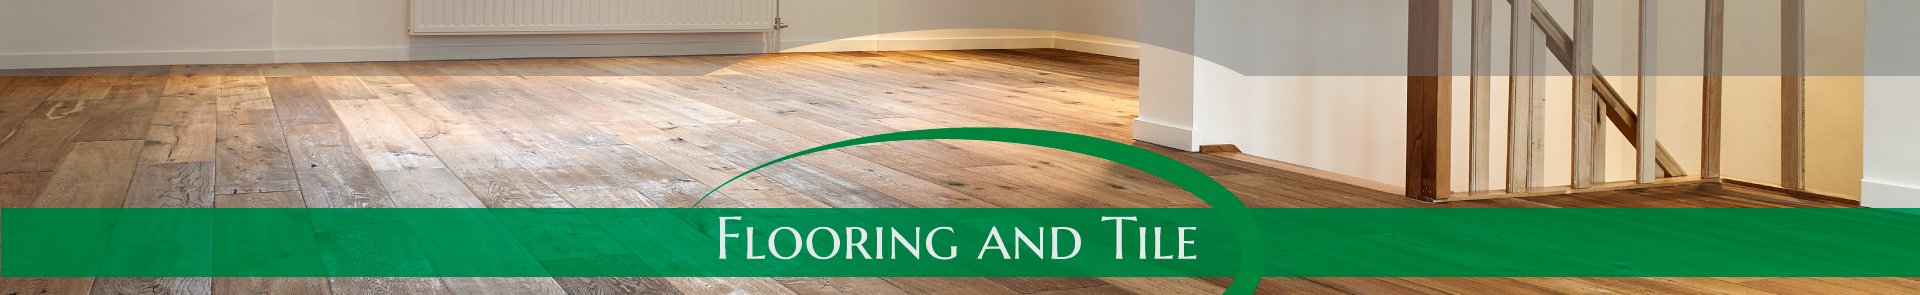 Flooring And Tile Fresno, Tulare, Kings counties 